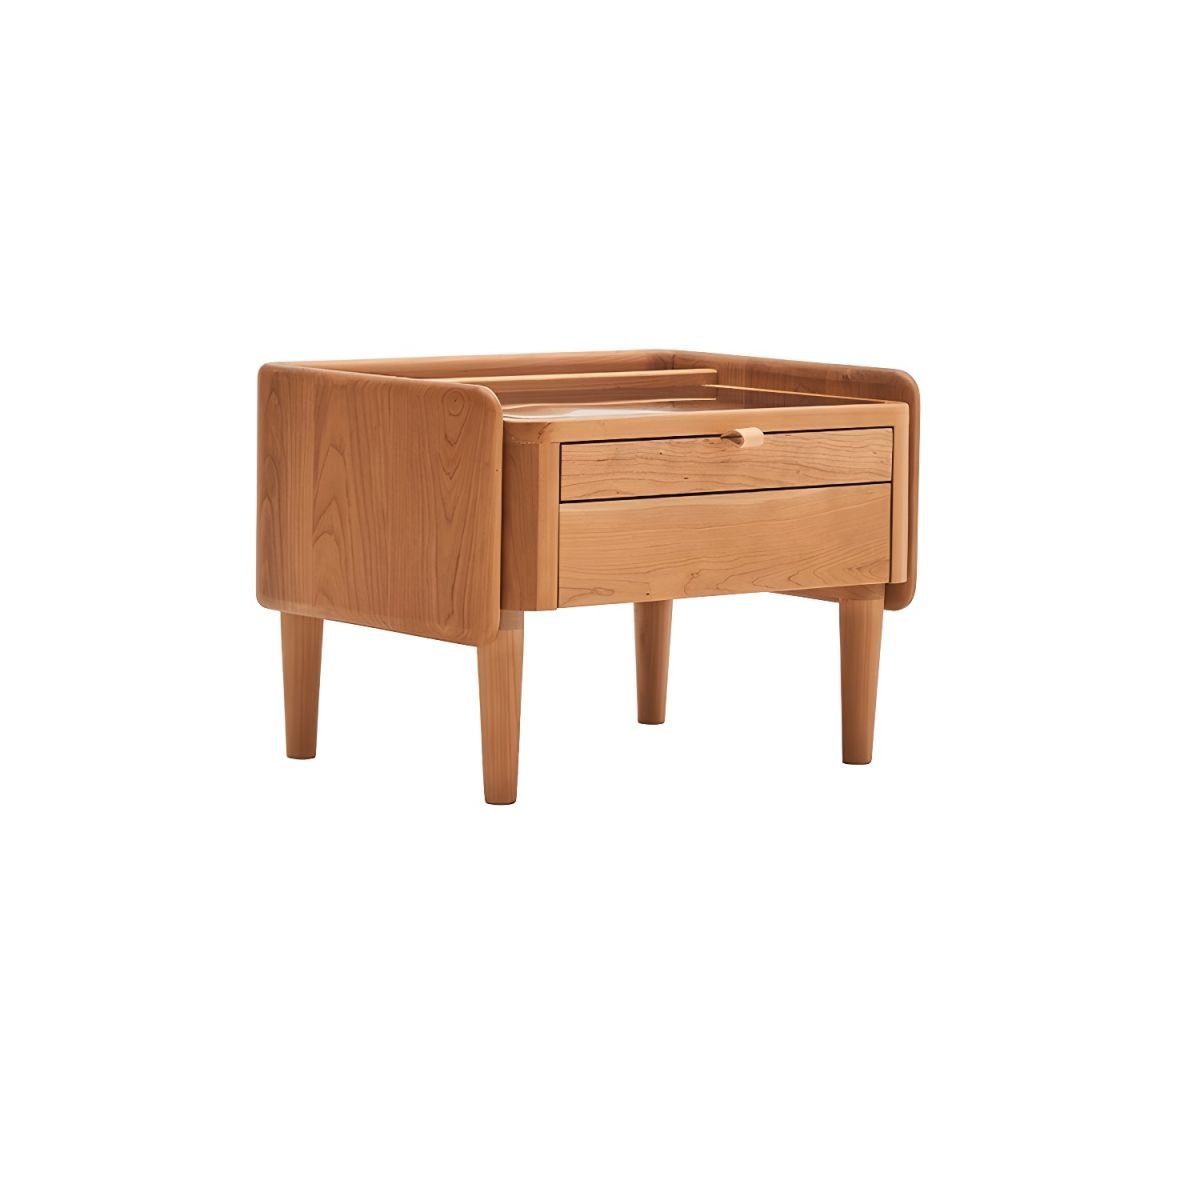 Natural Color Small Dressing Table Simplistic Cherry Wood for Living Room, 20"L x 17"W x 15"H